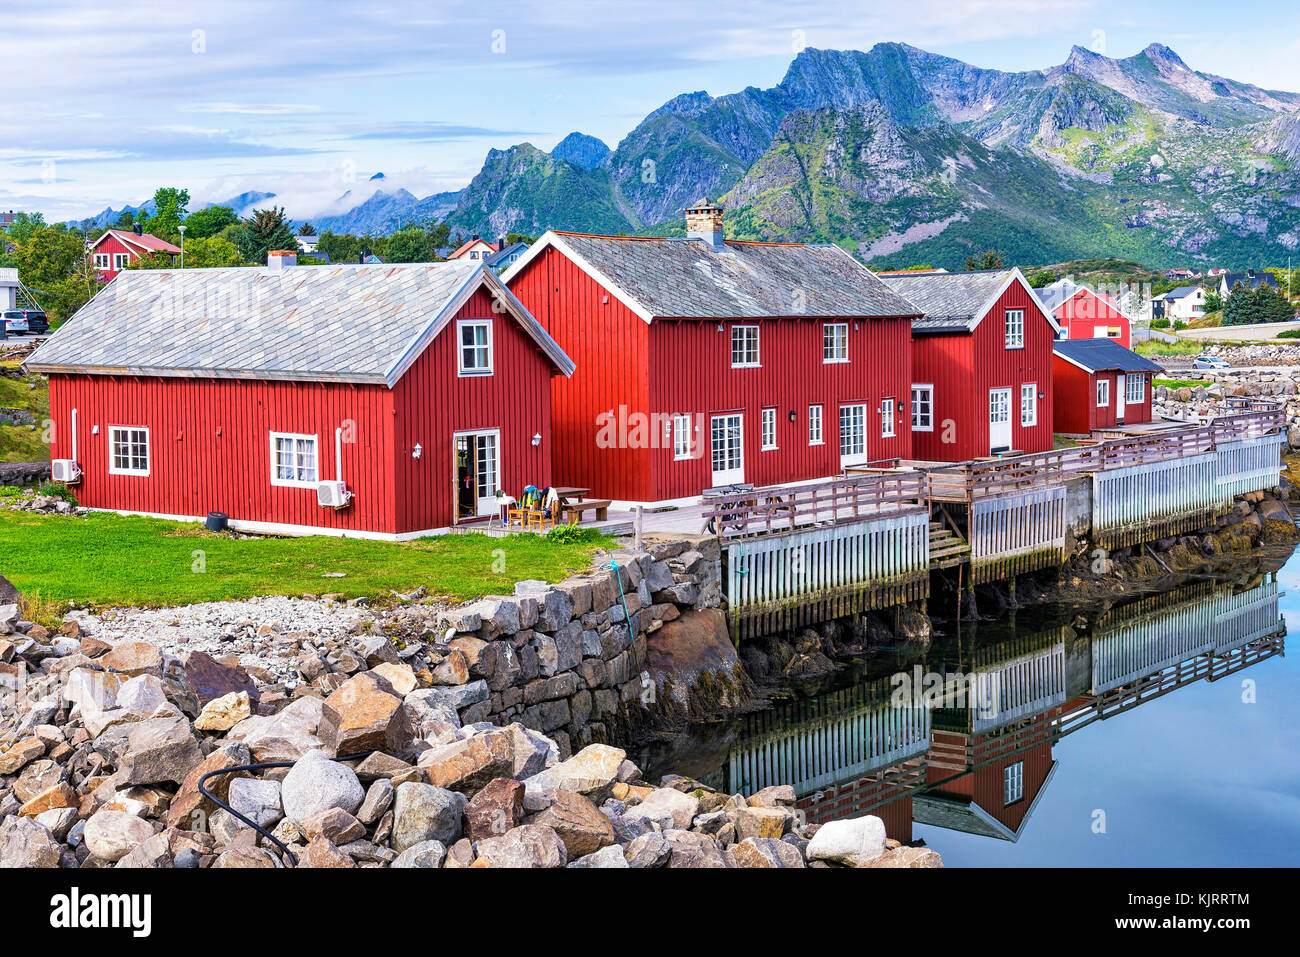 Rorbuer in Kabelvag village. Kabelvag is a village in the municipality of Vagan in Nordland county, Norway. Stock Photo